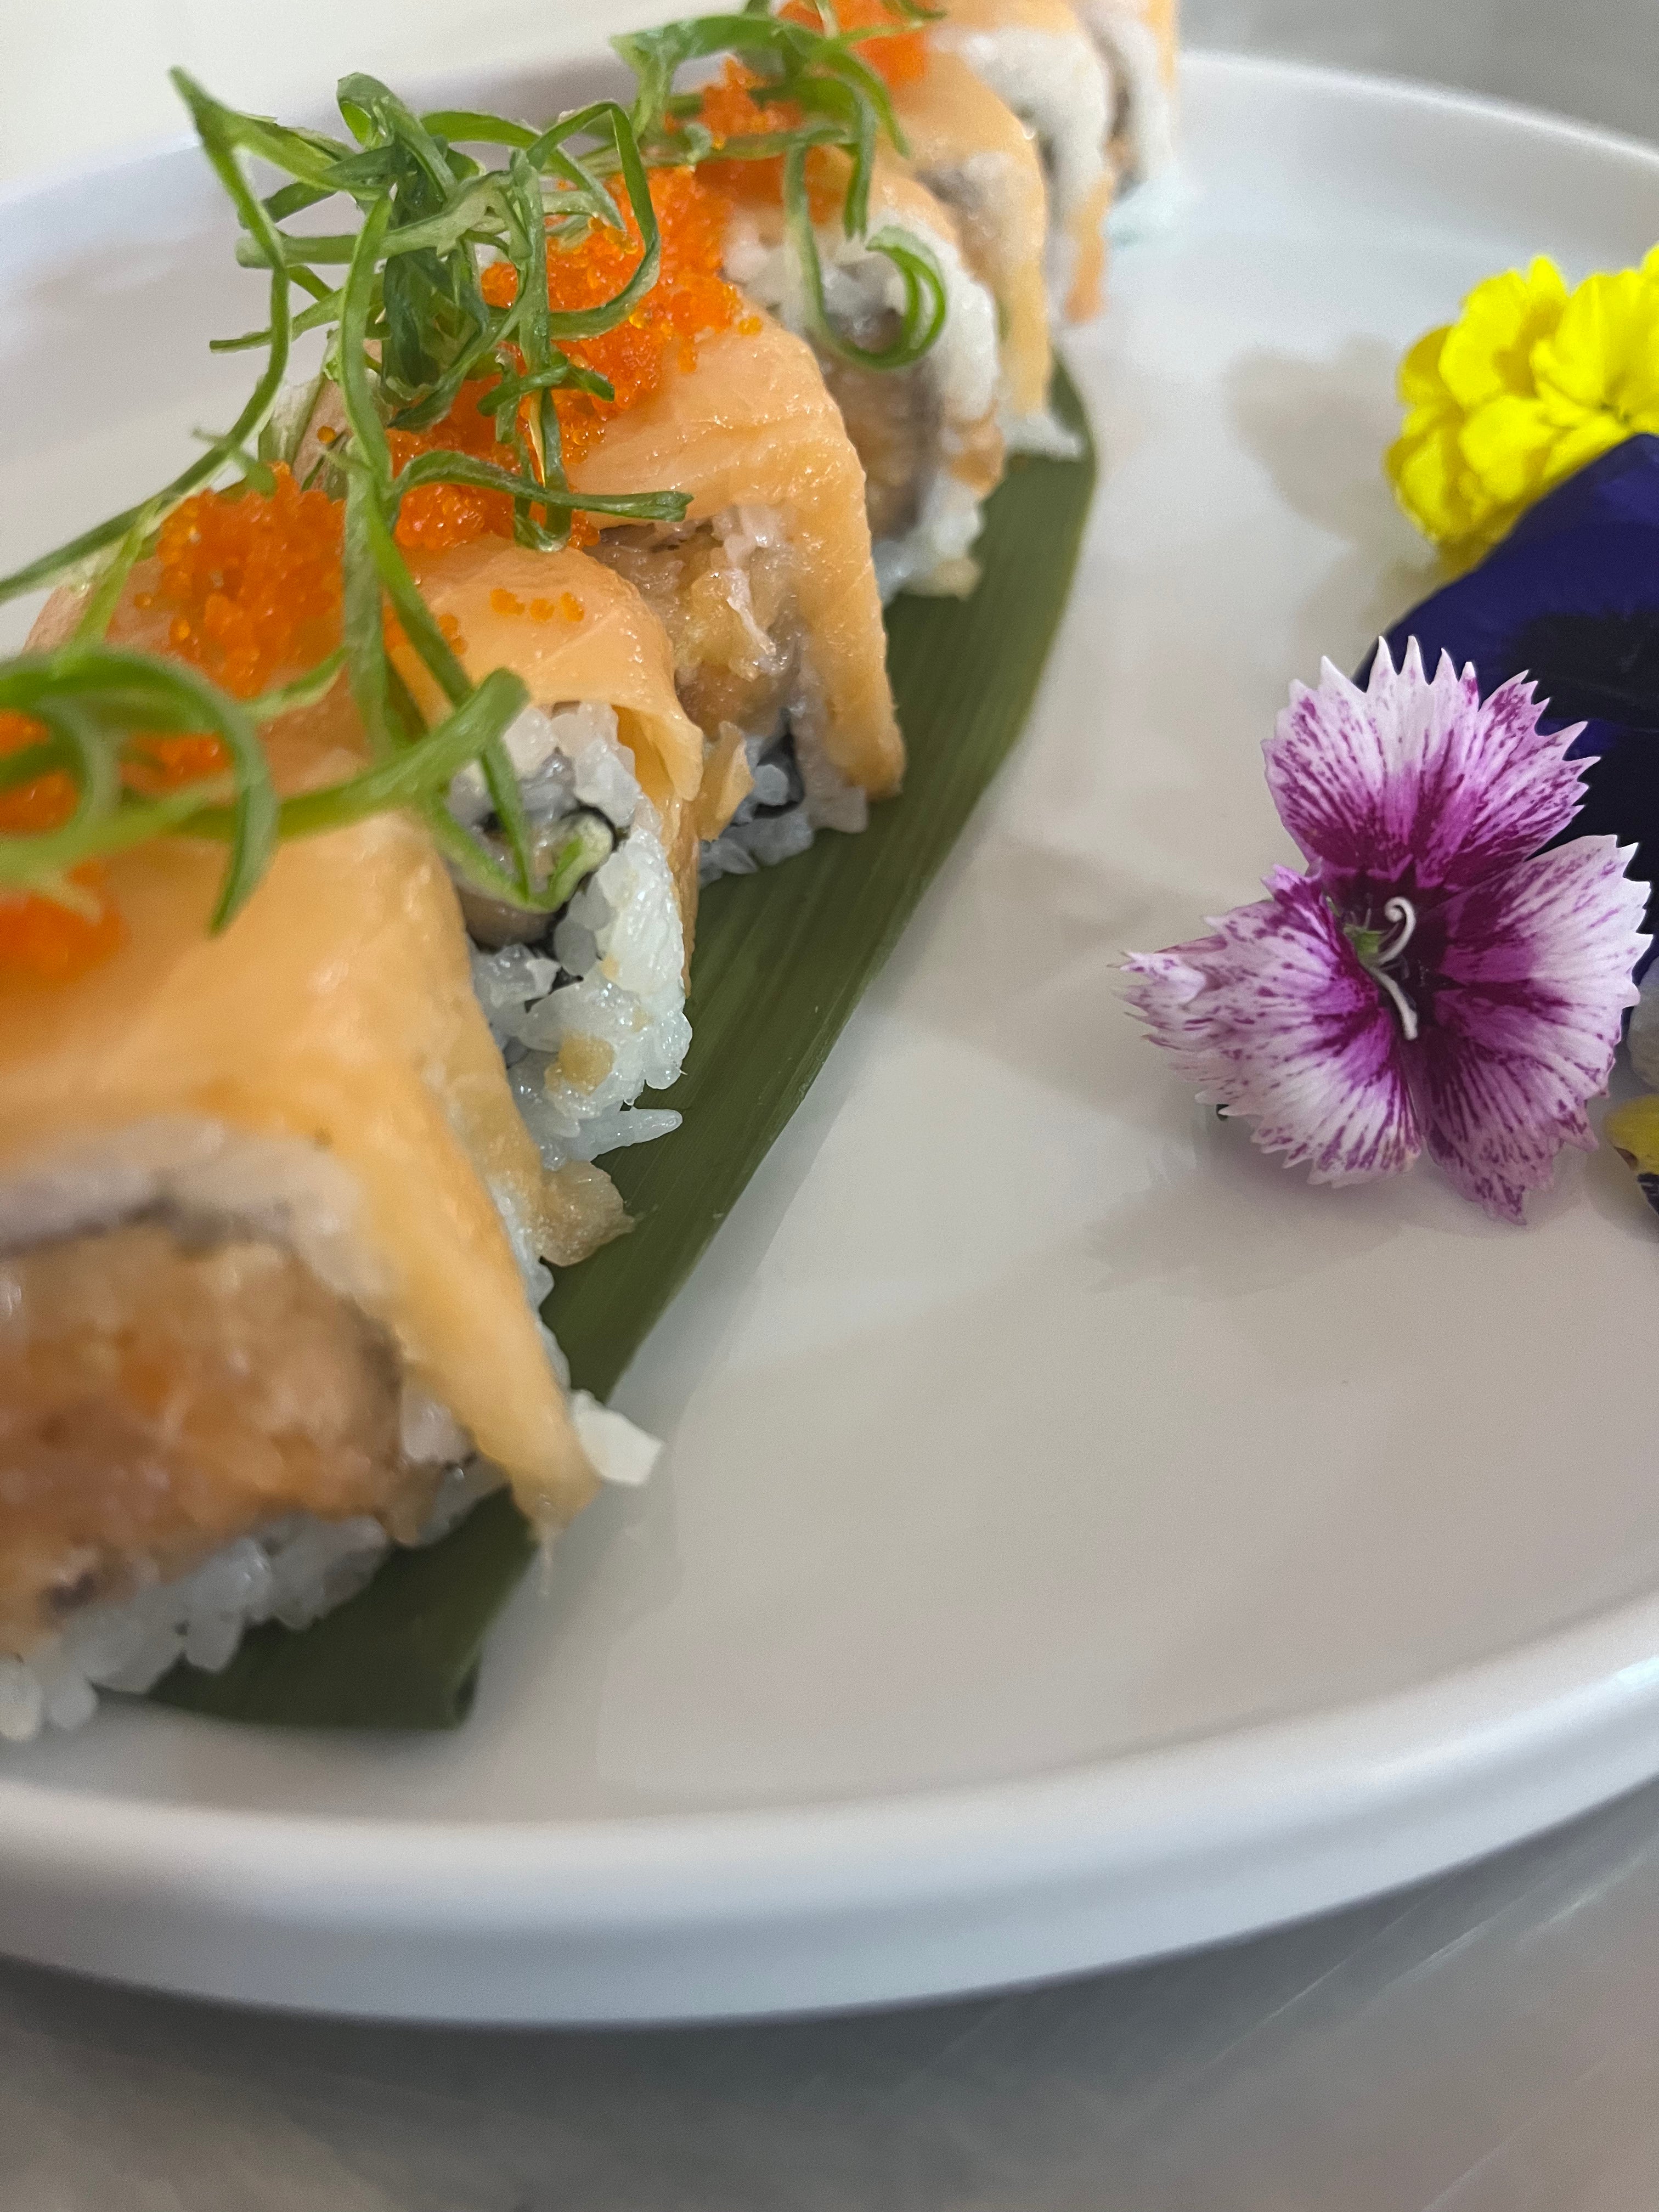 THE DOUBLE SALMON ROLL